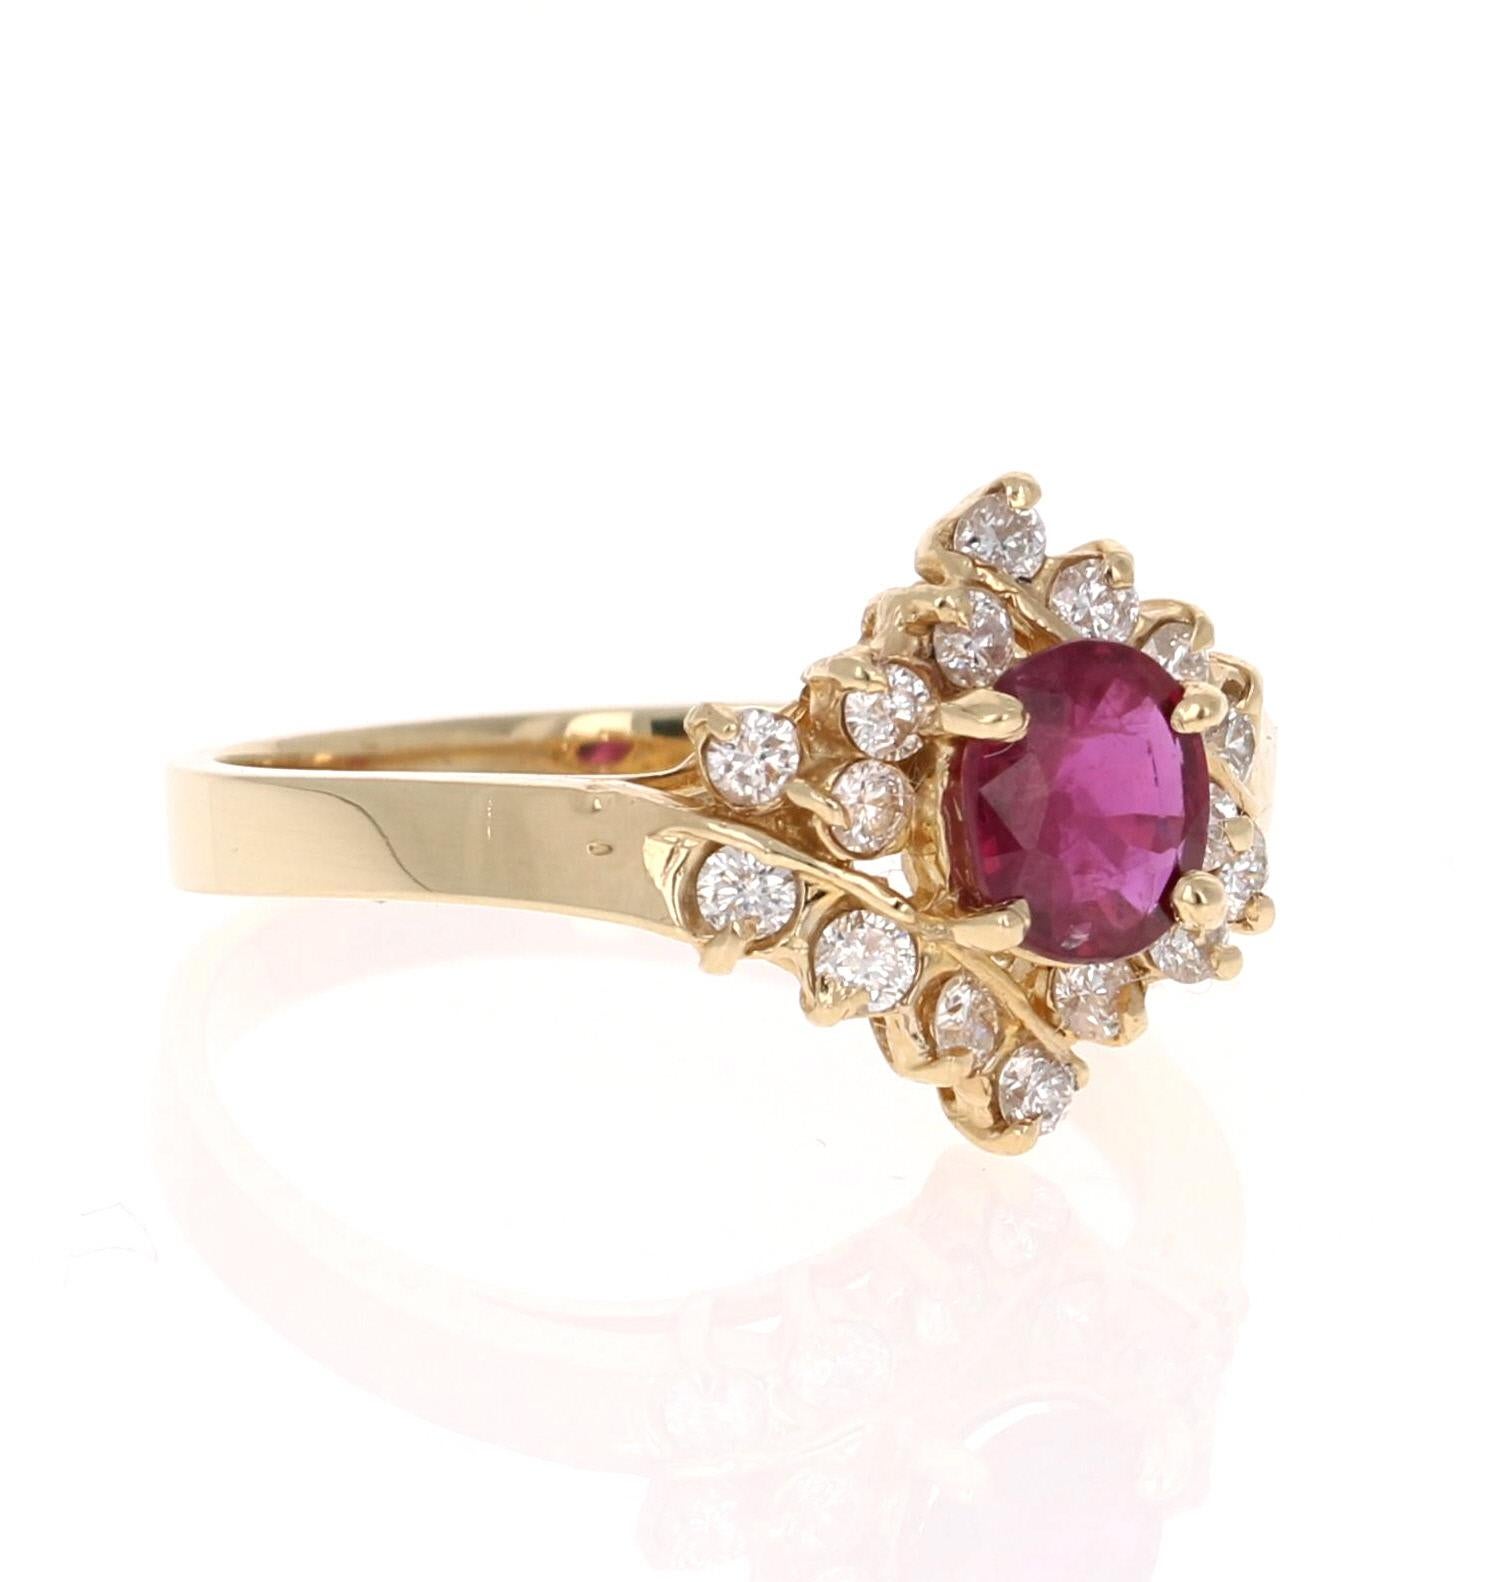 This ring has a 0.69 Carat Oval Cut Burmese Ruby that is set in the center and is surrounded by 16 Round Cut Diamonds that weigh 0.37 carats. The Clarity and Color of the Diamonds is SI-F  The total carat weight of the ring is 1.06 Carats. The